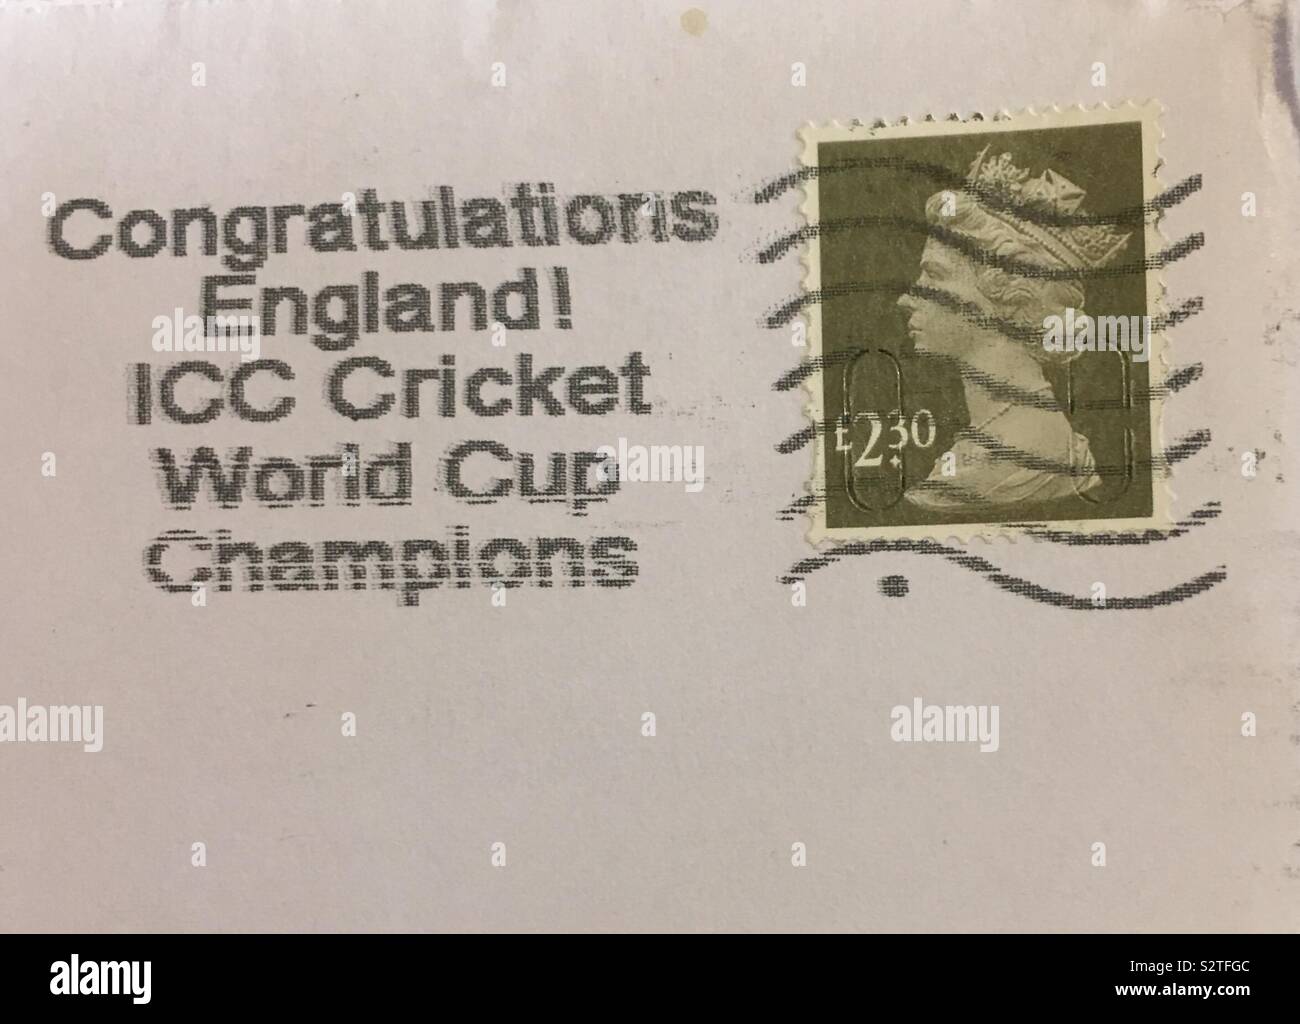 Angleterre ICC Cricket World Cup Champions 2019 timbre 2,30 Royal Mail Banque D'Images